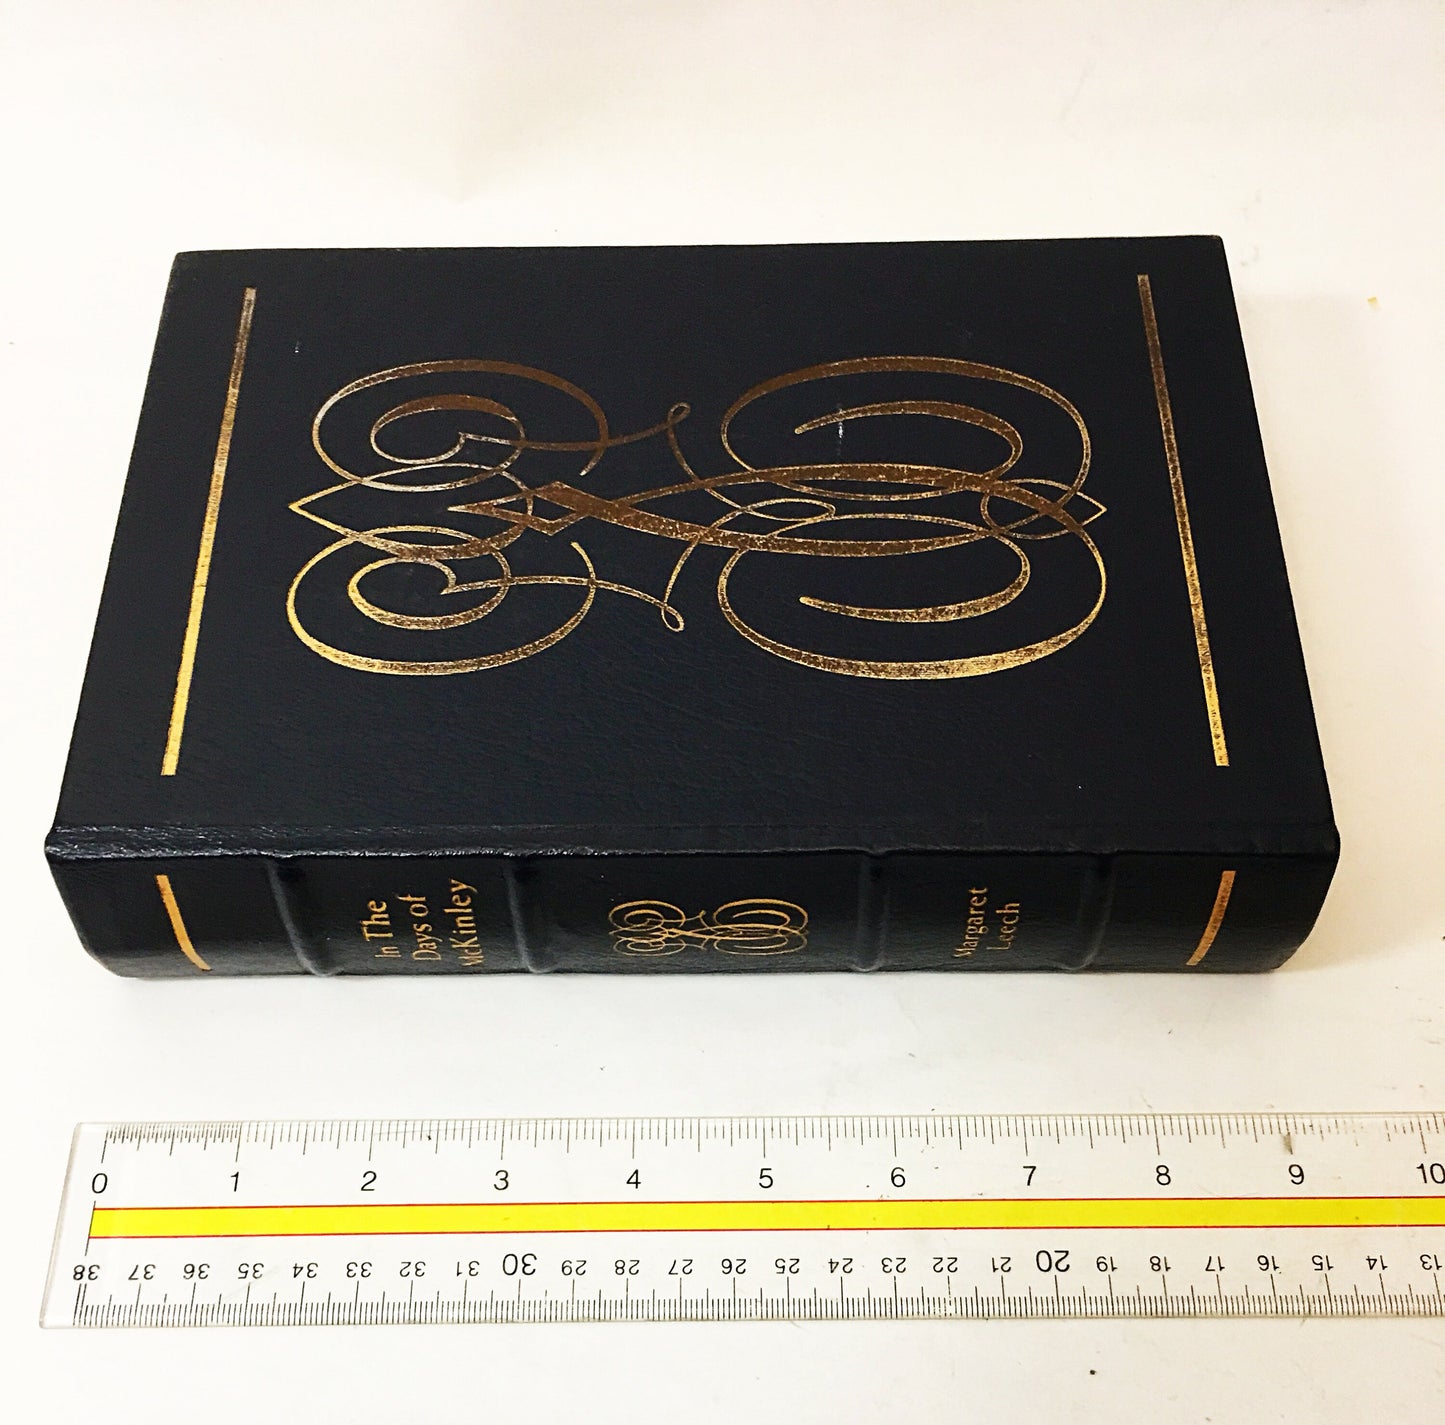 In The Days Of McKinley Vintage Easton Press Book circa 1986 by Margaret Leech. Finely bound genuine leather with gilt edging. Book gift